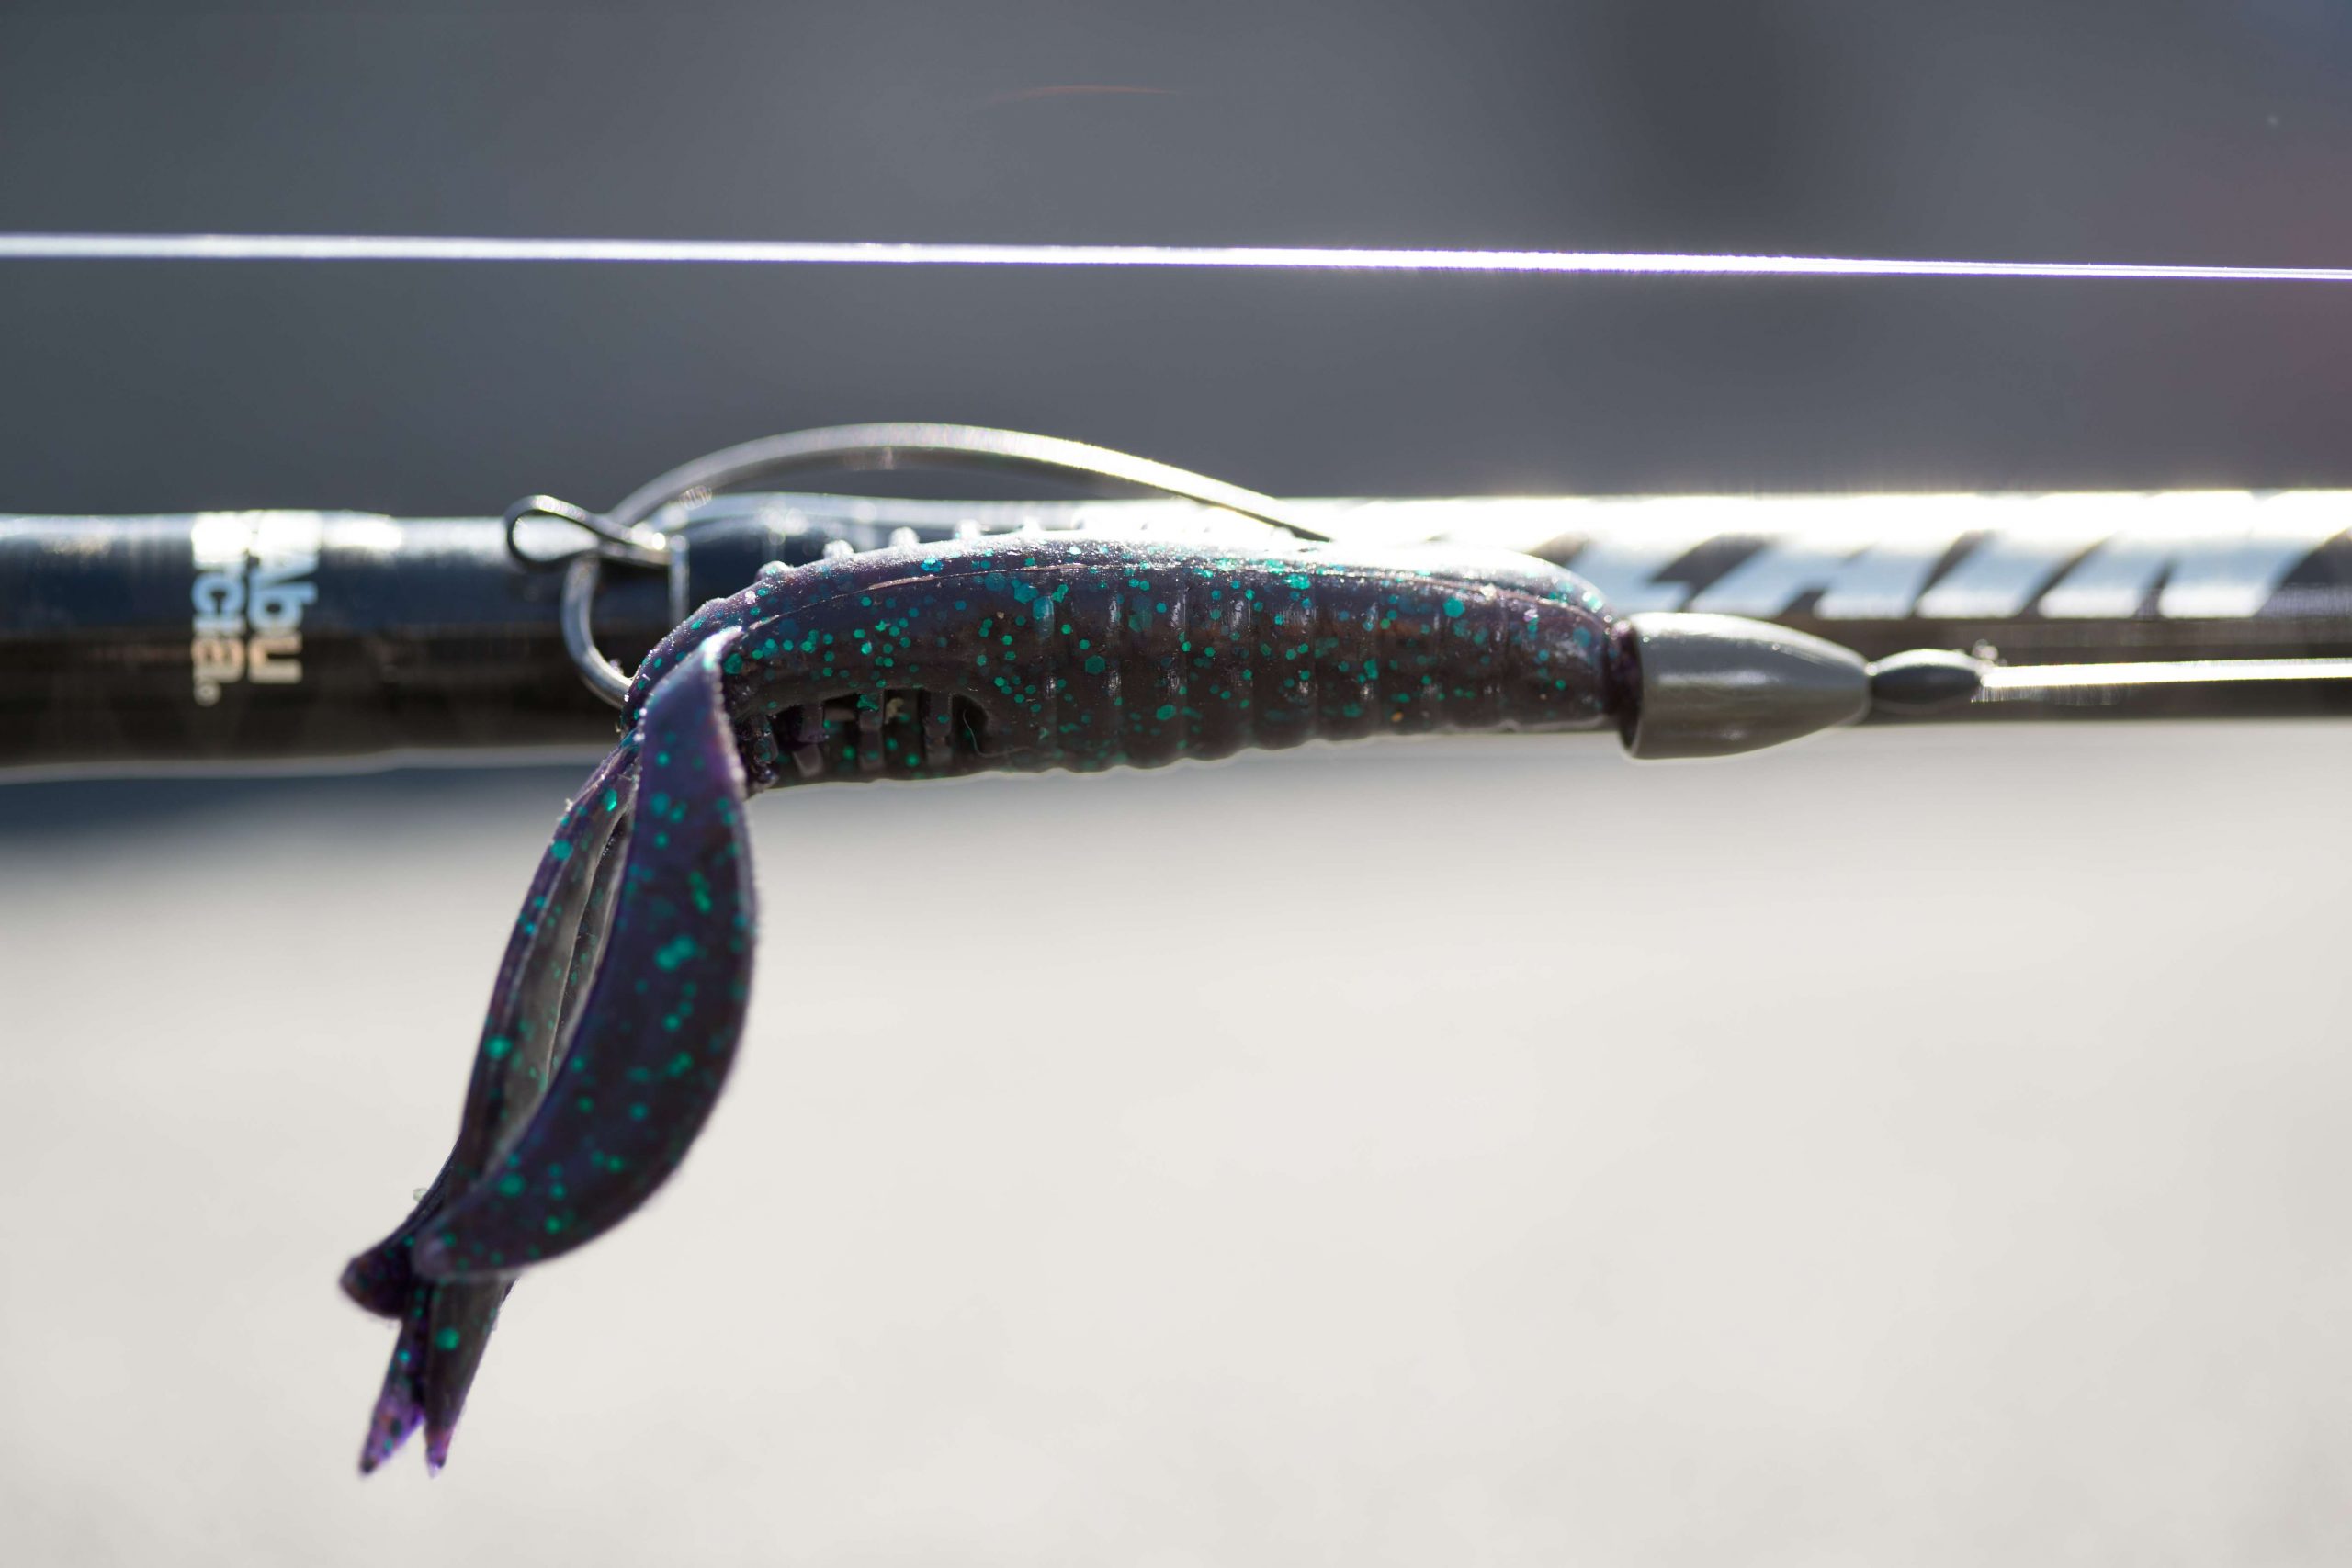 Powerbait Pit Boss<br>
Berkley<br>
$3.99<br>
The ever-popular Skeet Reese design has been taken to the next level. The PowerBait Pit Boss is designed to mimic both bait fish and crawfish. The unique swimming action makes this bait irresistible and is an awesome flippinâ bait.	